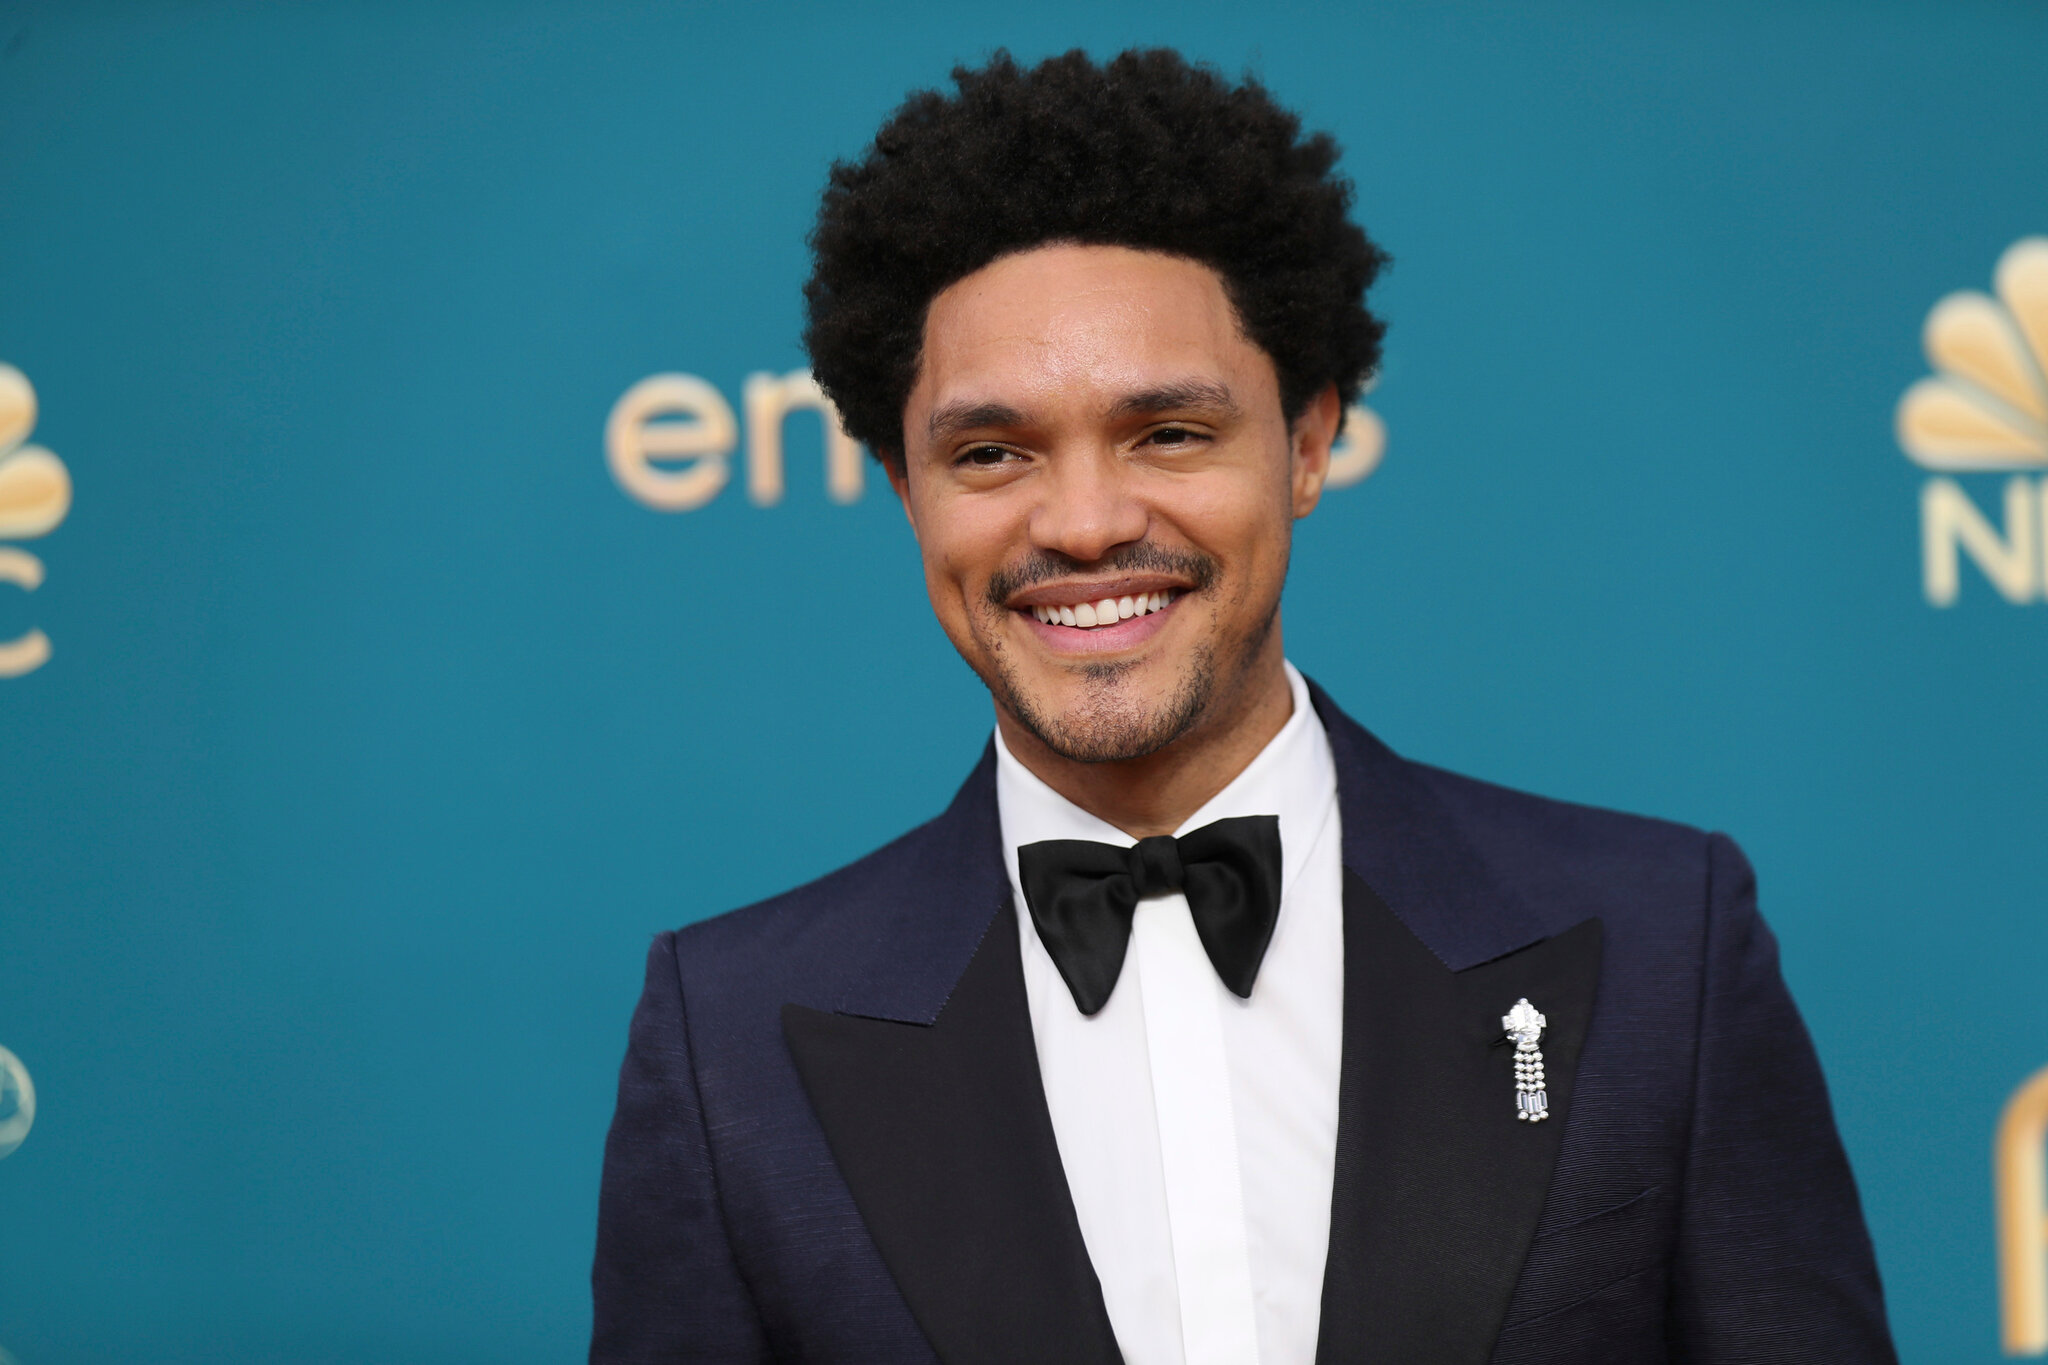 Is Trevor Noah Aging Gracefully Or Getting Help From Good Docs?